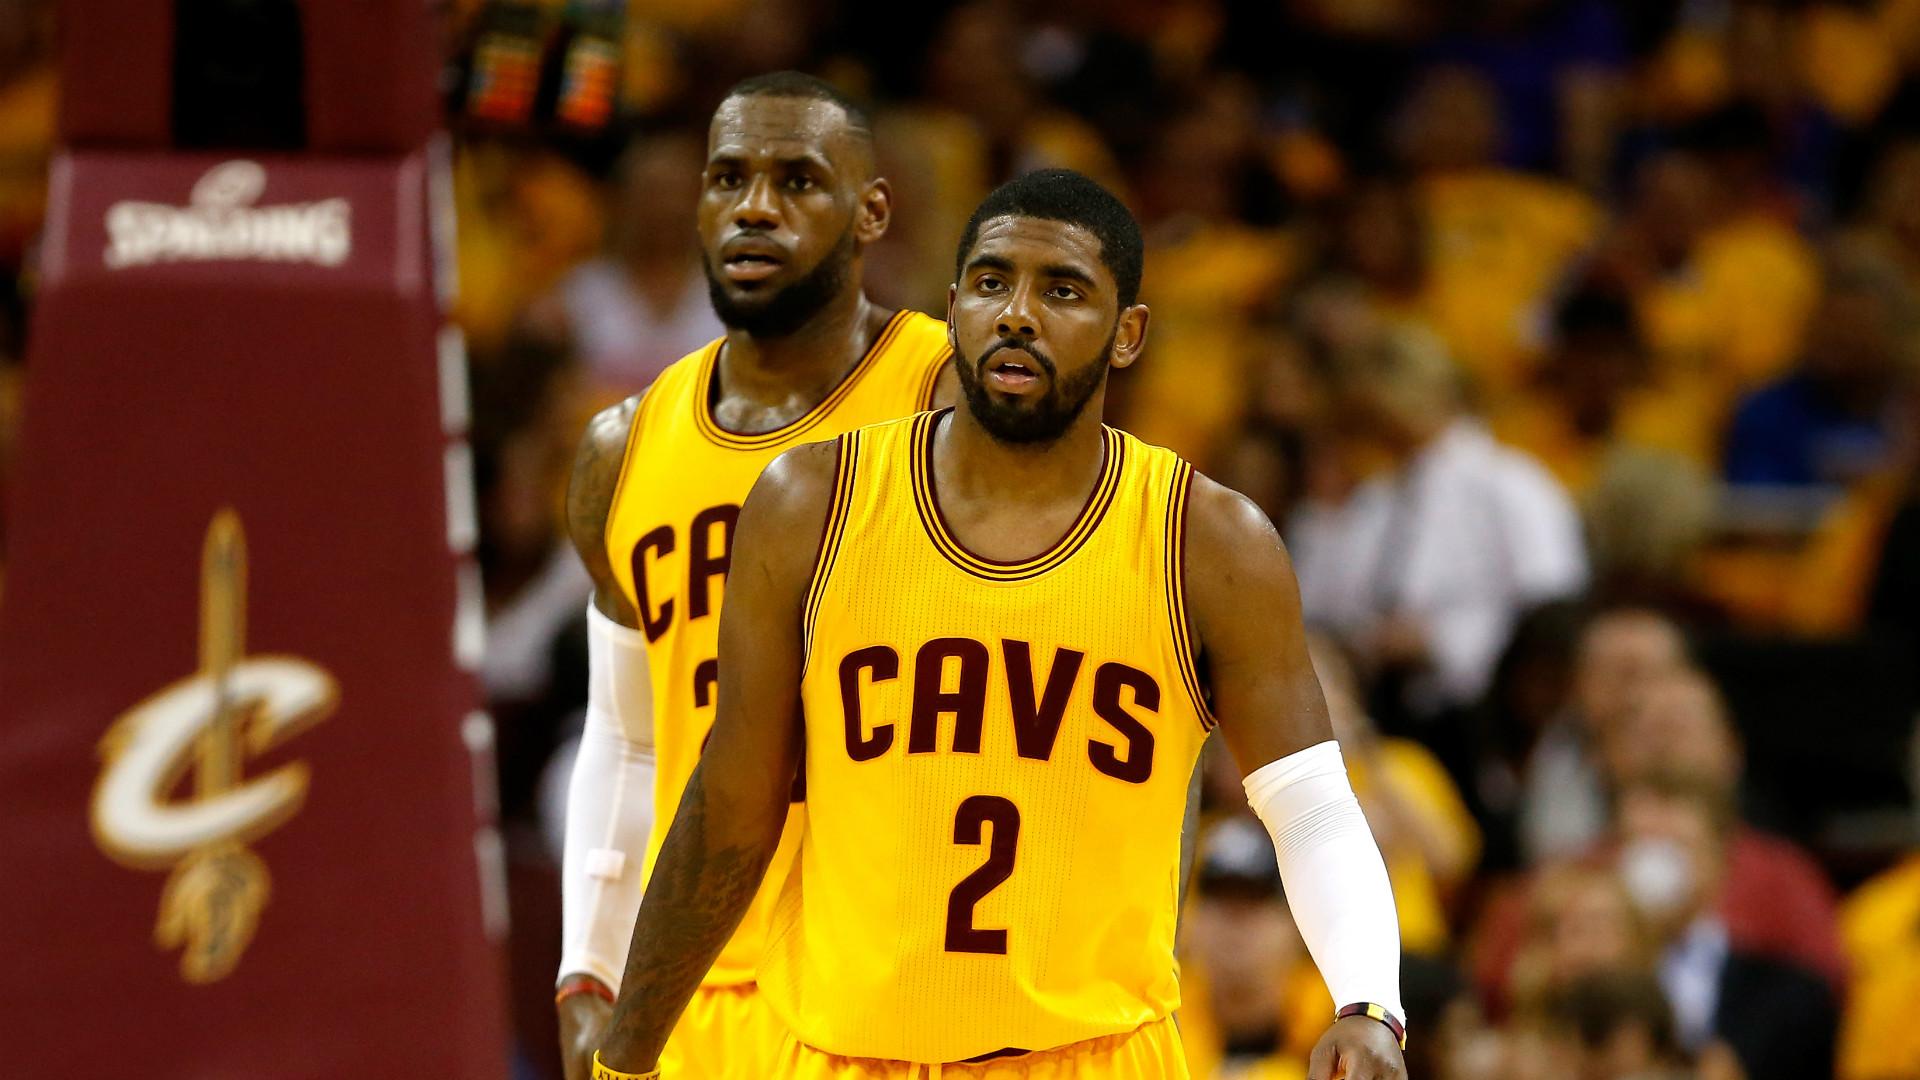 Kyrie Irving didn't want LeBron James to return to Cavs